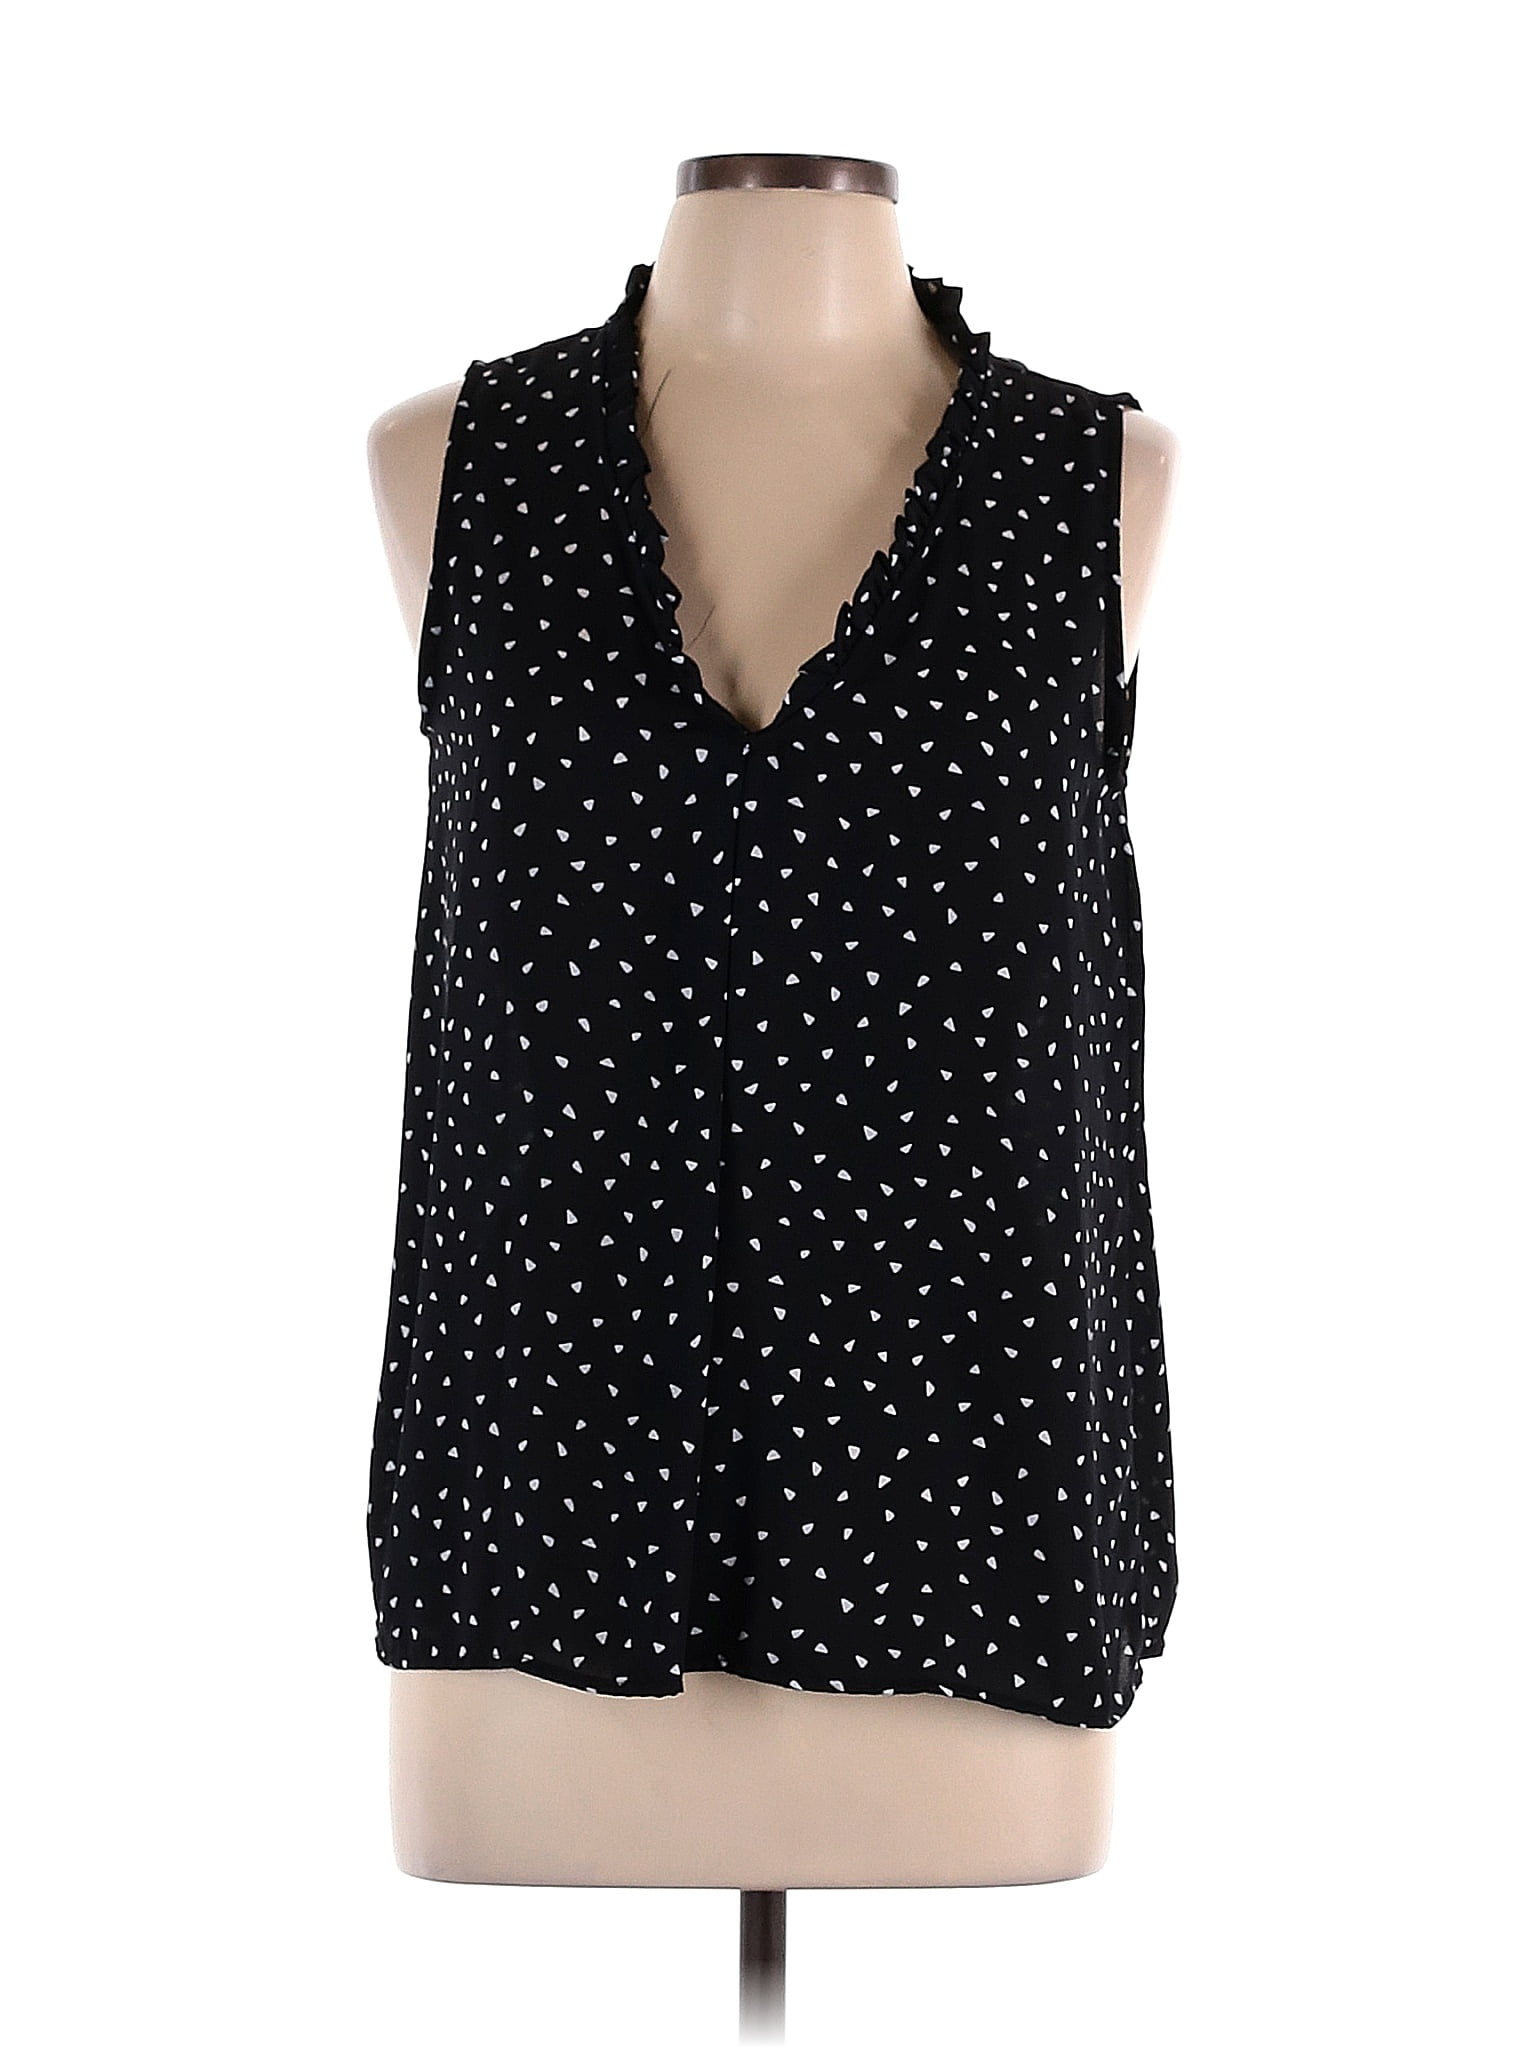 Gibson Look 100% Polyester Polka Dots Black Sleeveless Blouse Size M ...